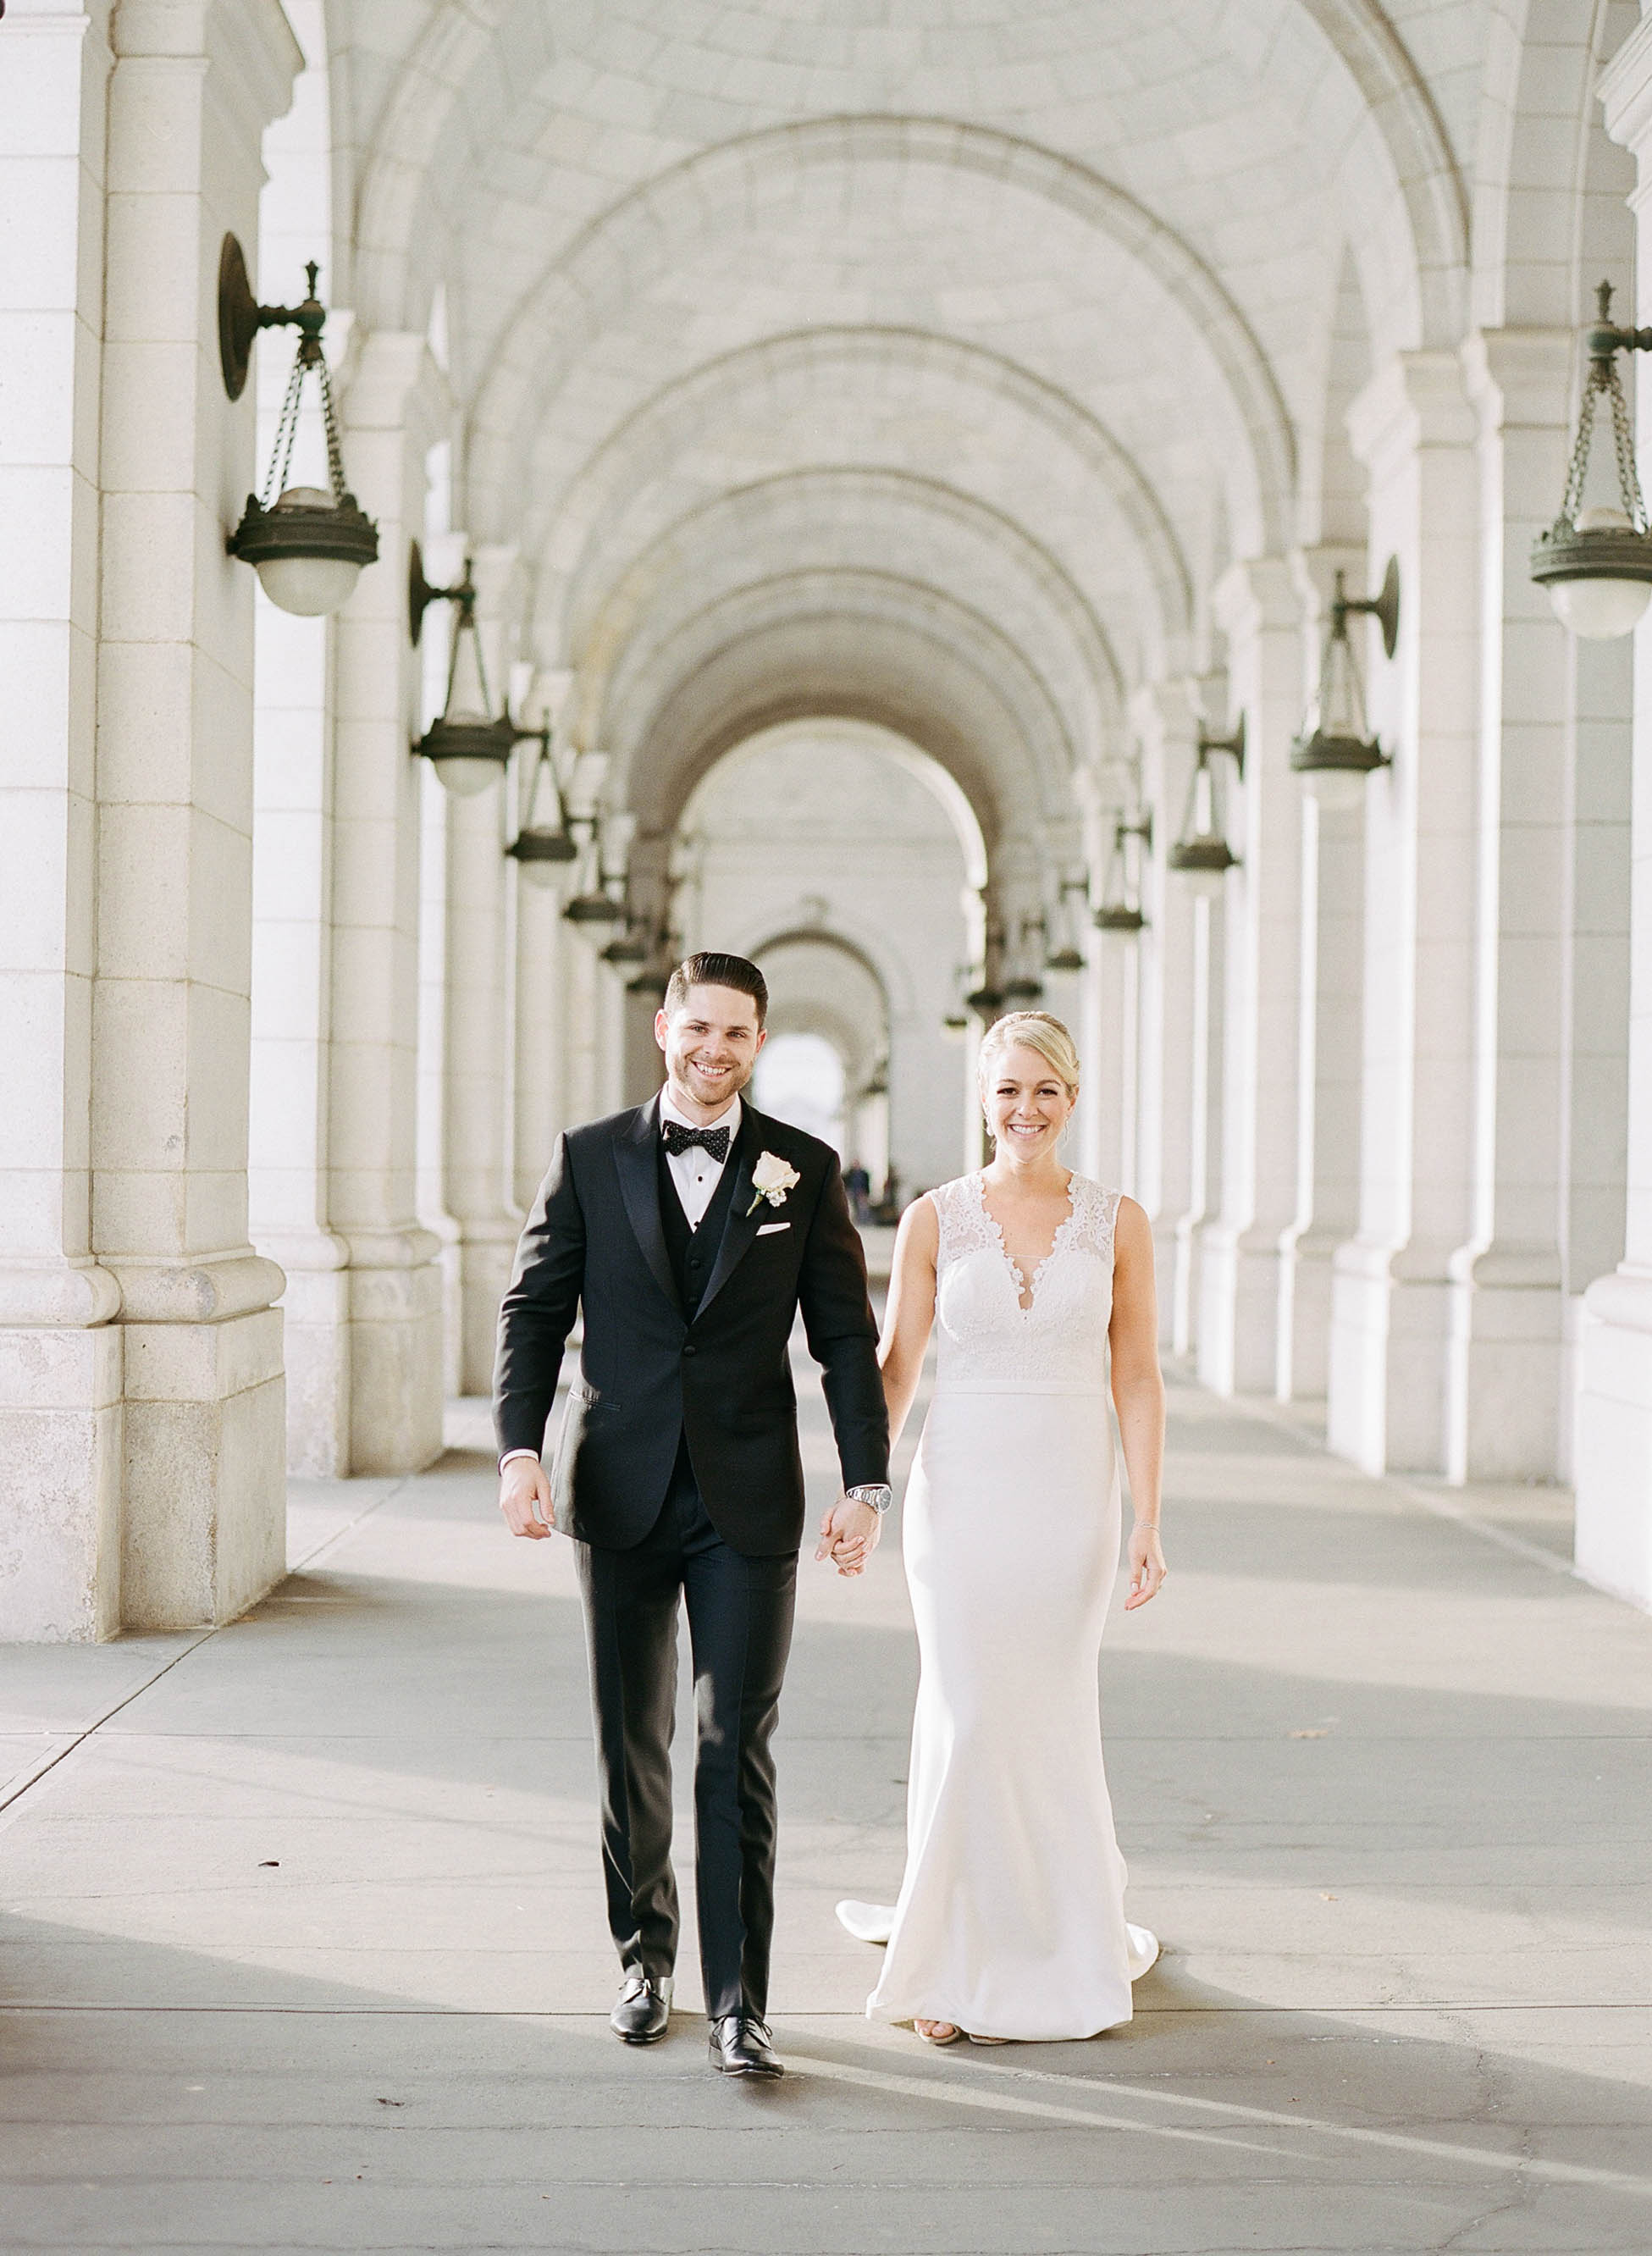 Bride and groom strolling along the facade of Union Station in Washington DC